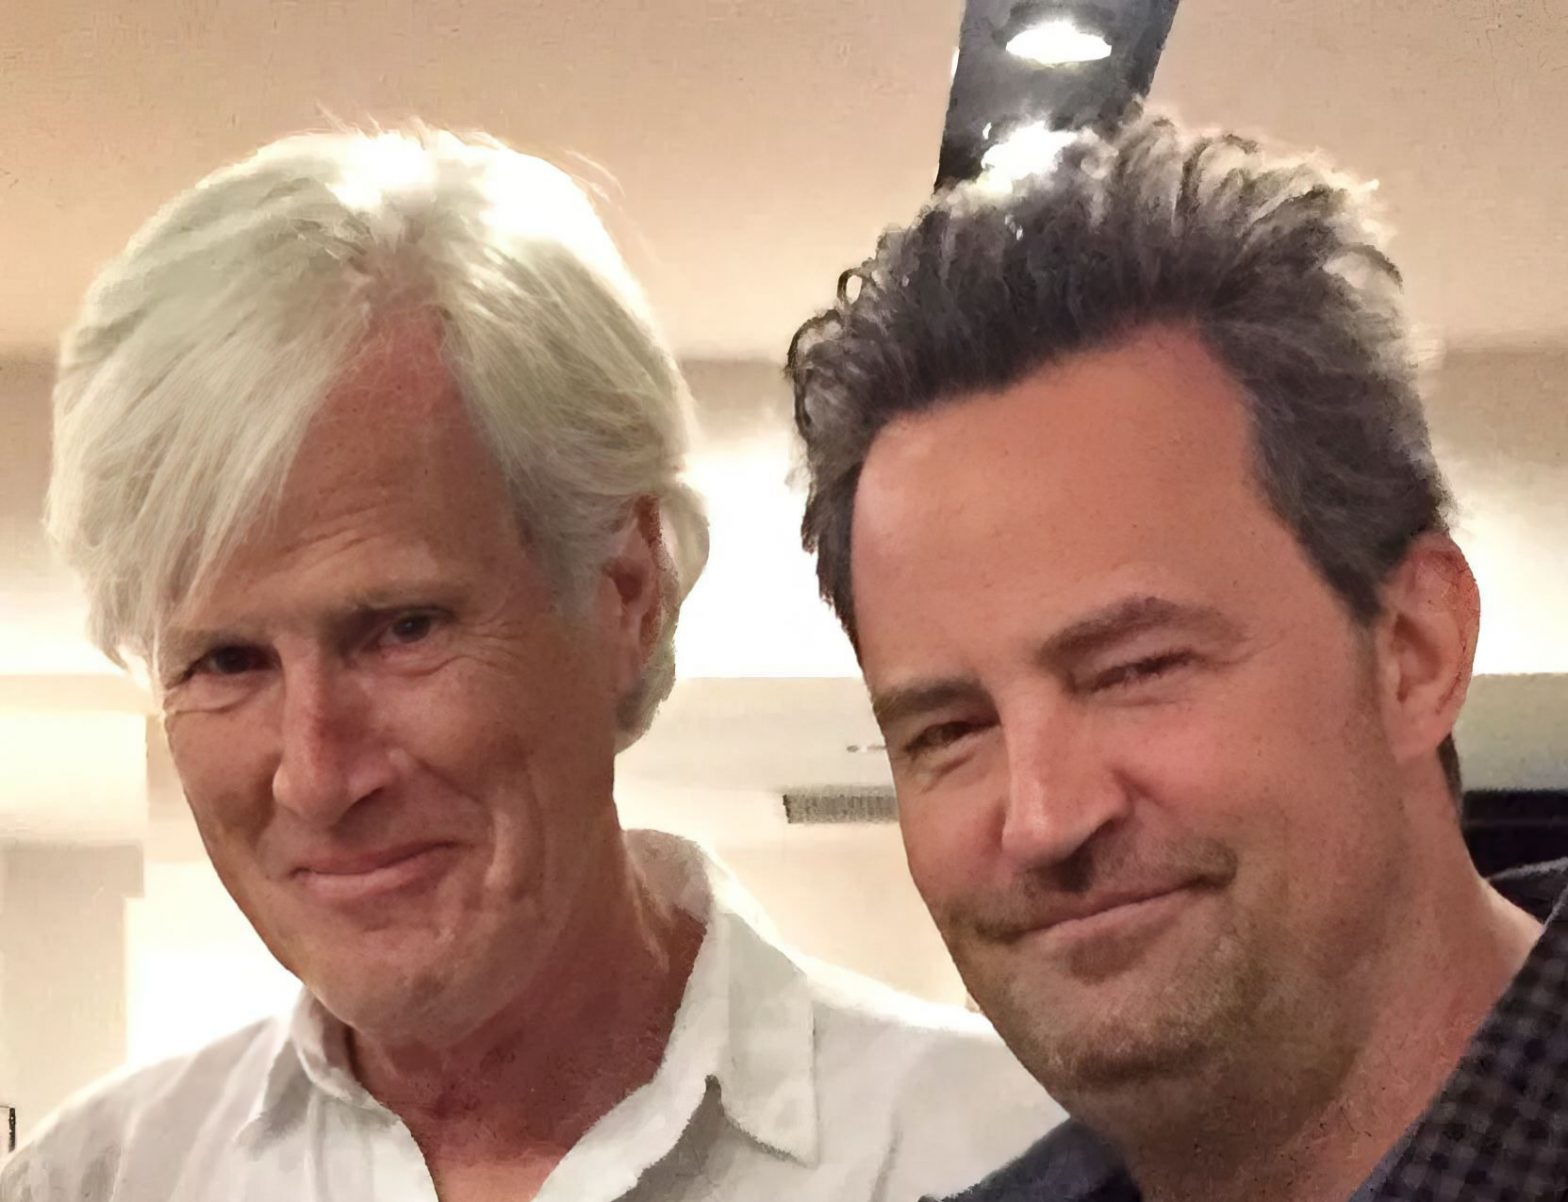 Who is Keith Morrison, stepfather of Matthew Perry (Chandler)?